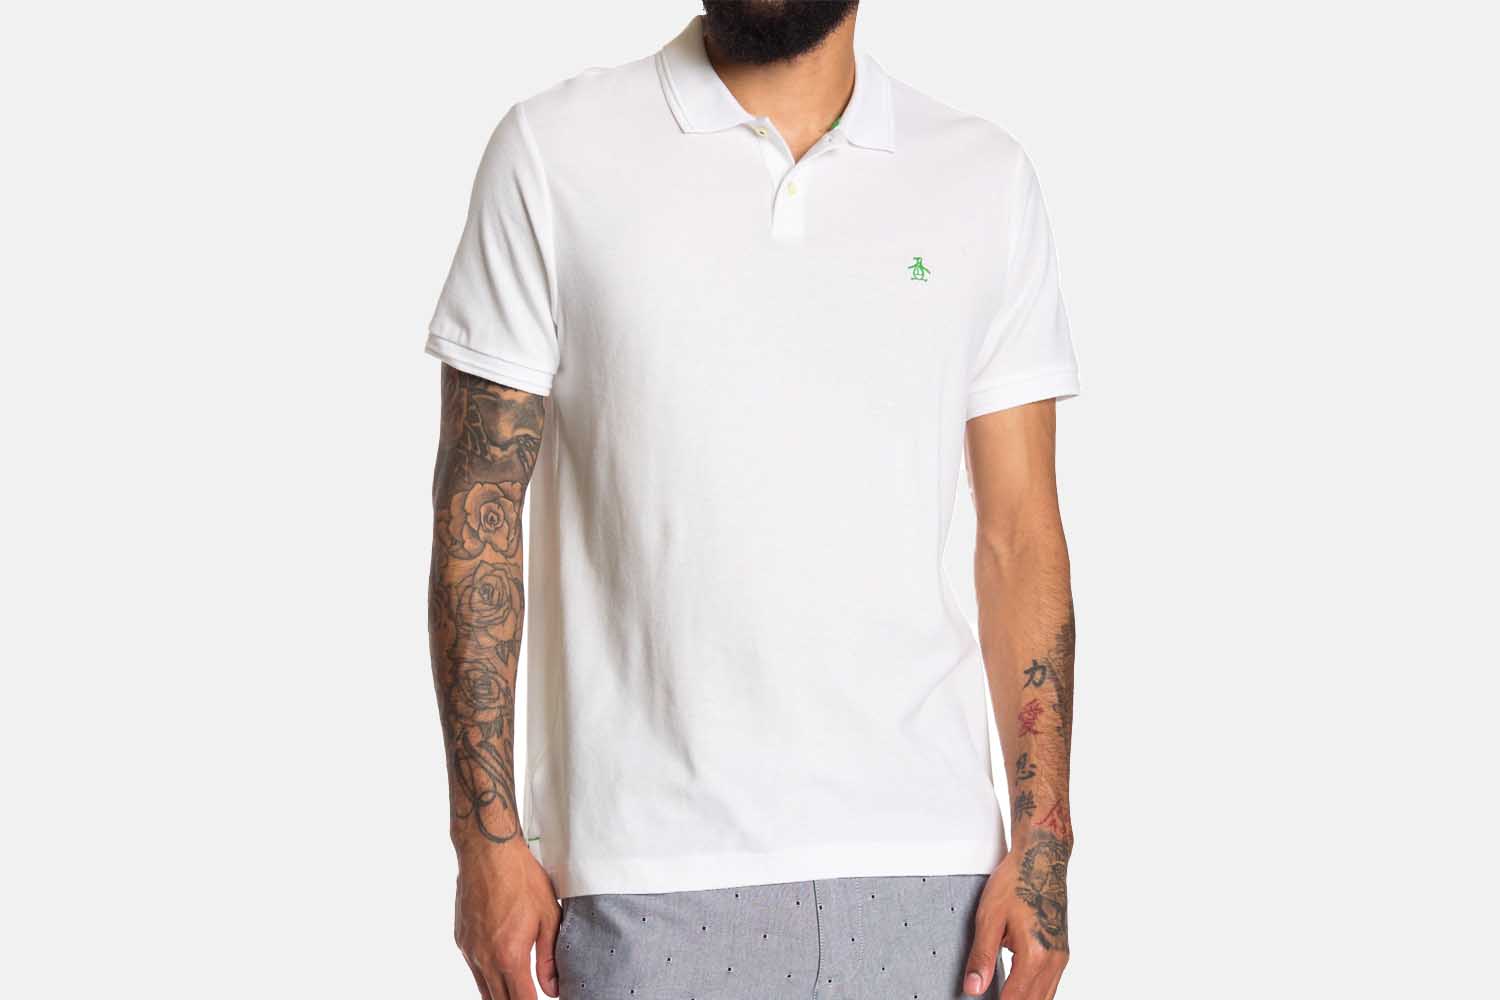 Deal: Save Over 50% on Original Penguin’s Classic Cotton Polo